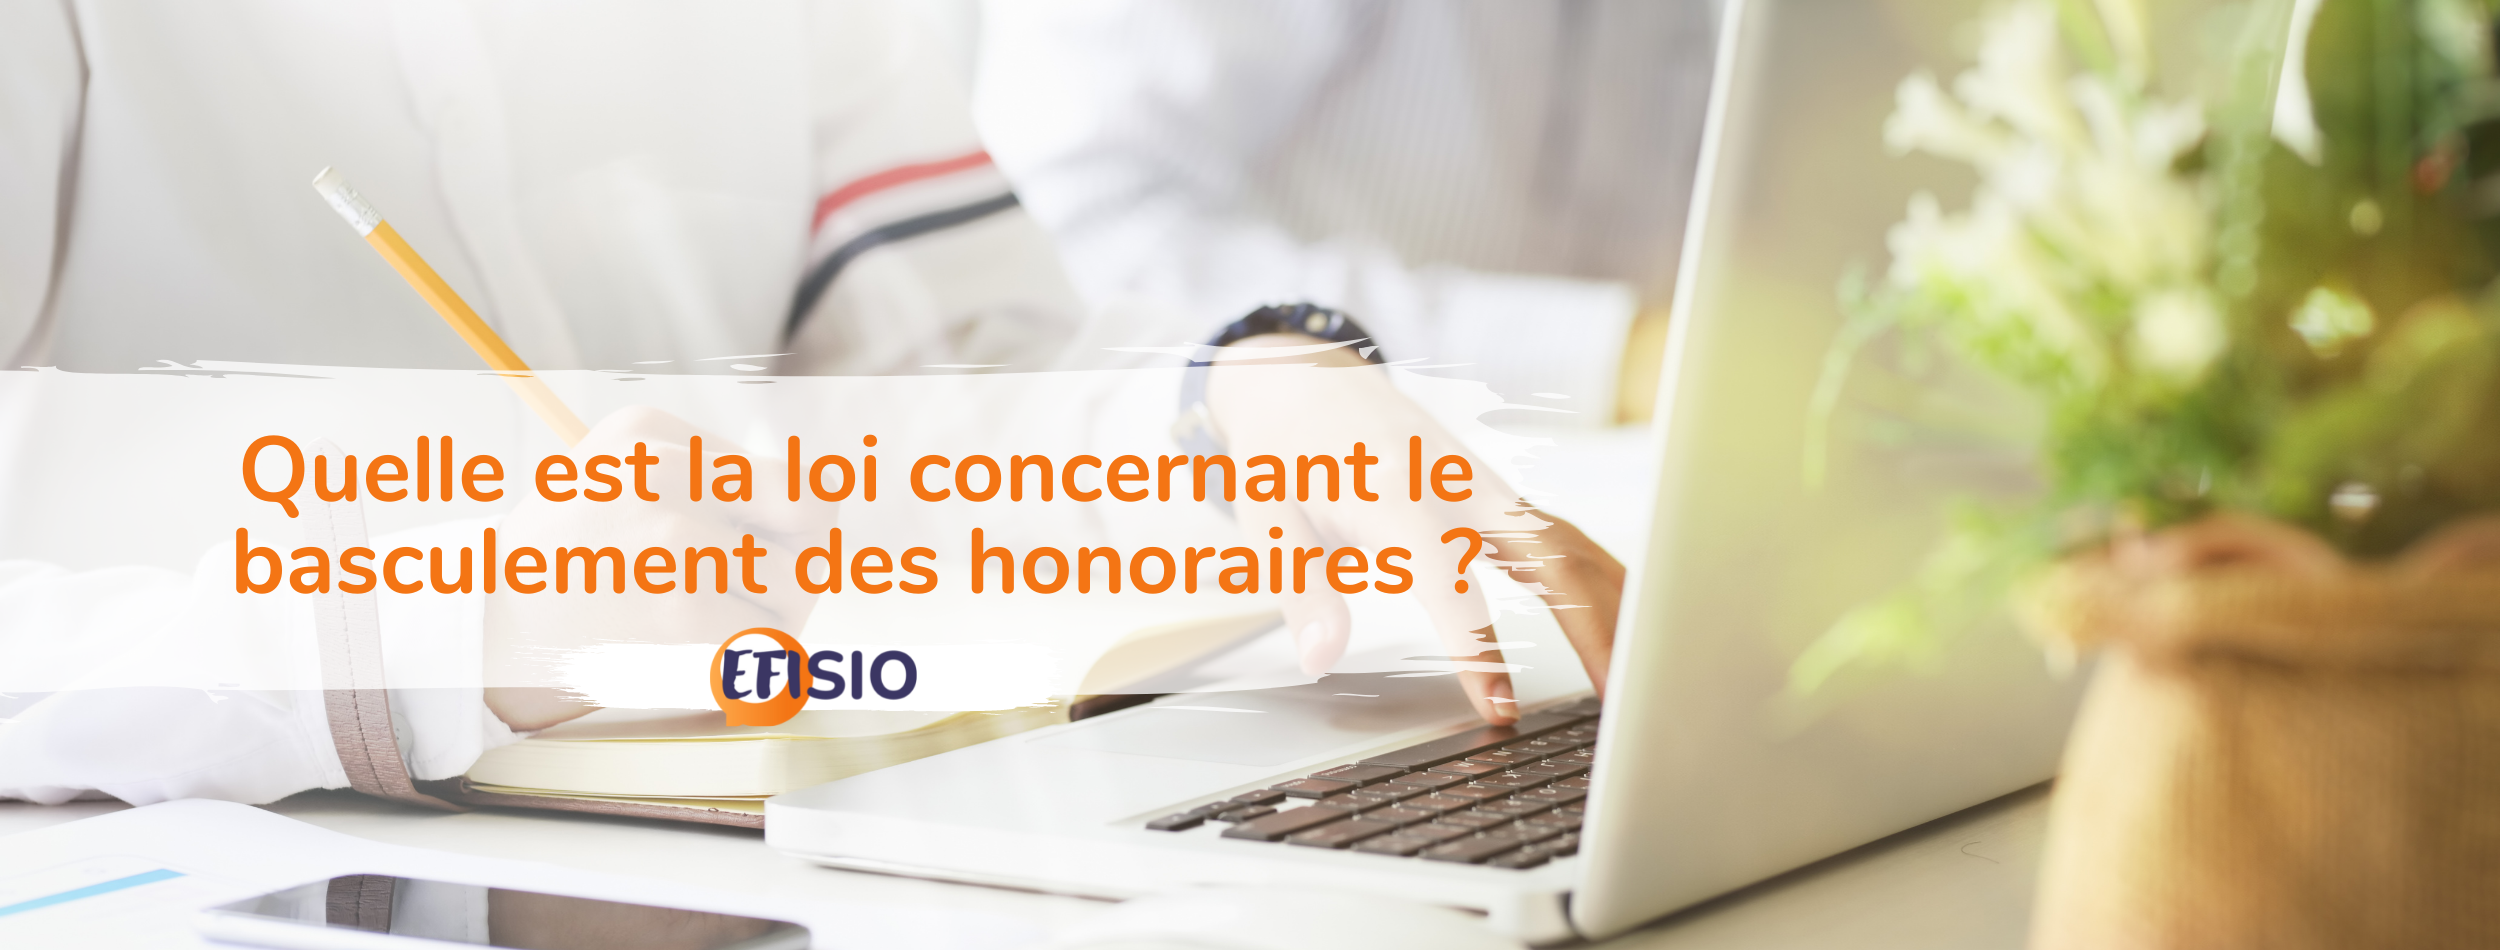 Basculement honoraires